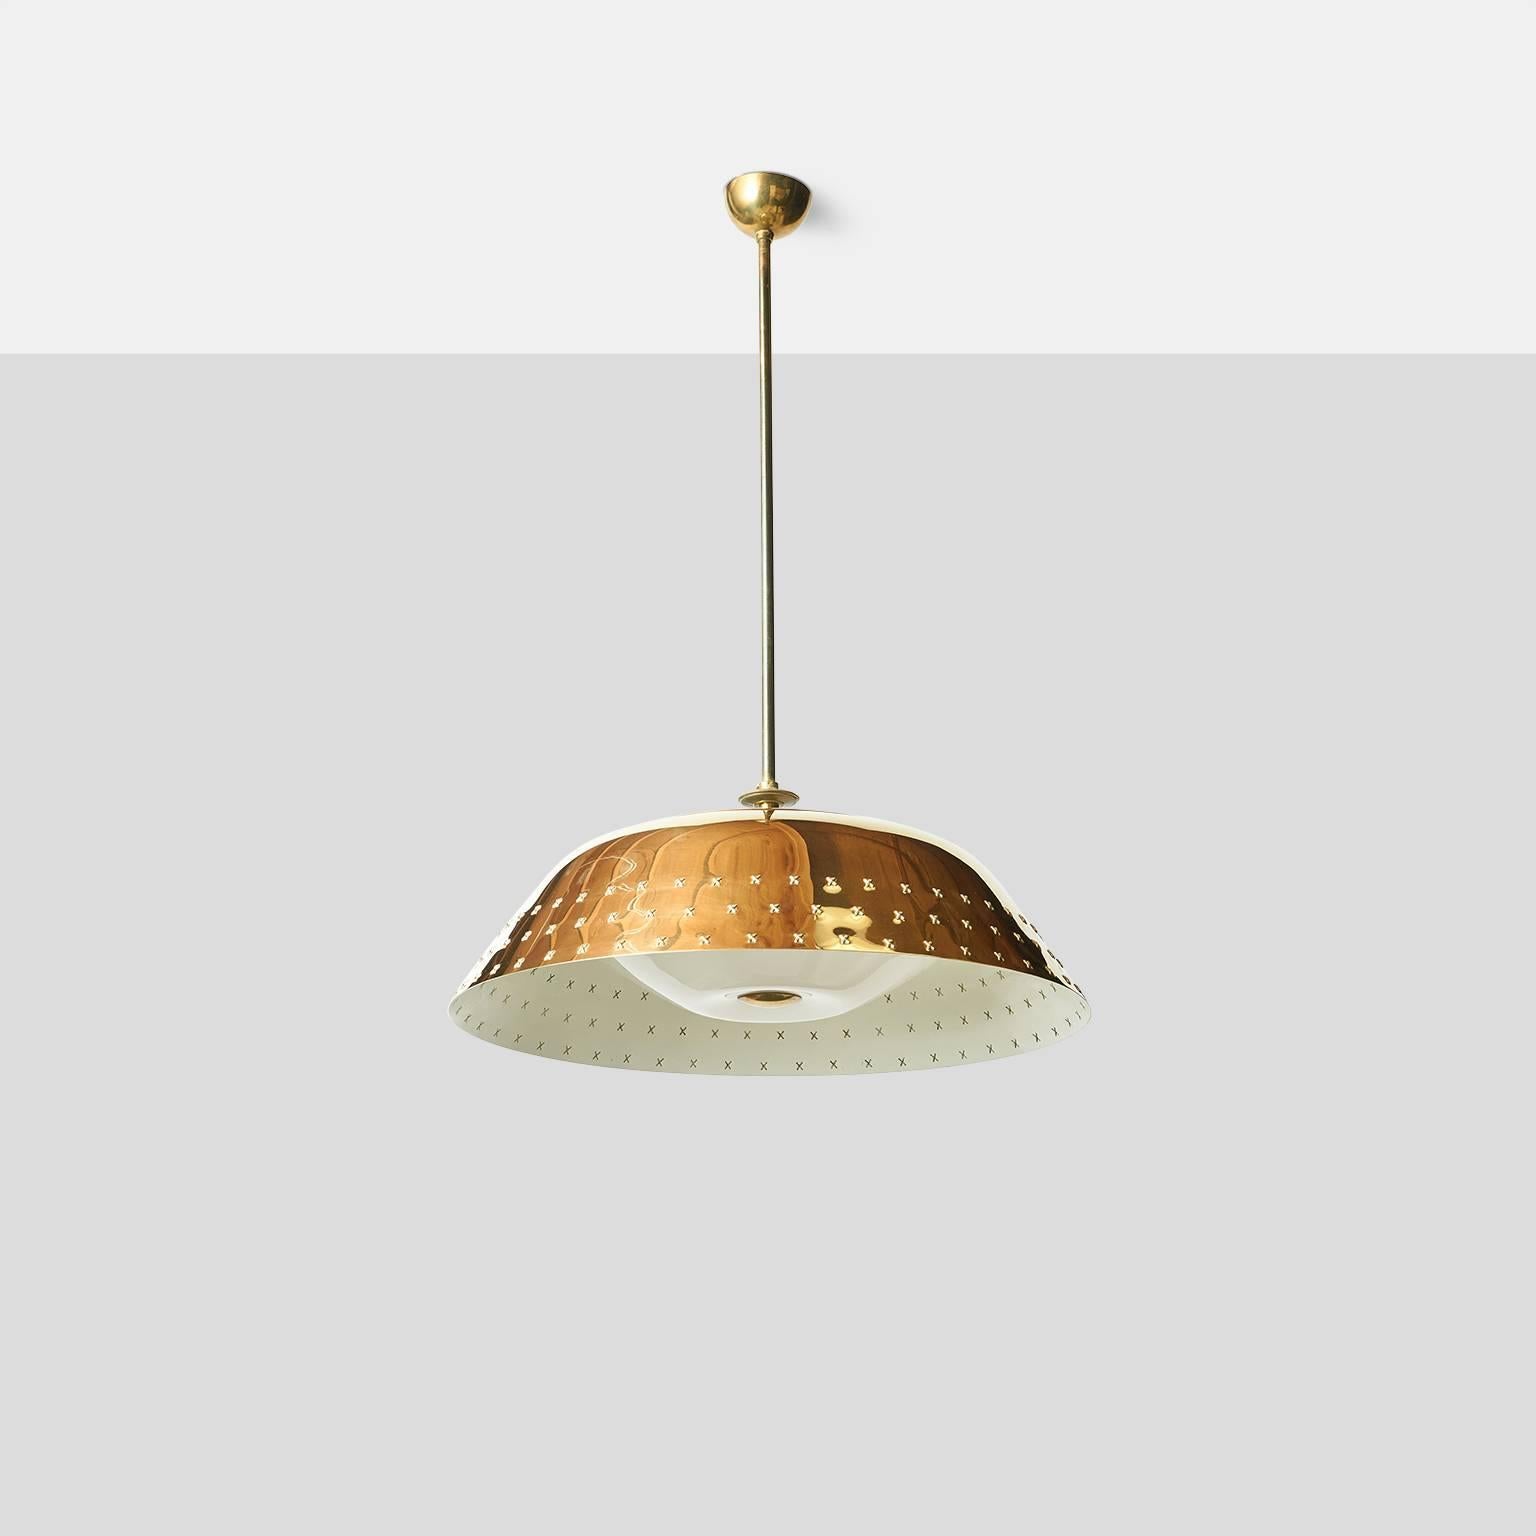 A brass chandelier with perforated X-pattern detail around perimeter, translucent dome covers the bulbs with a brass finial in the center. Manufactured by Orno. 
Finland, circa 1960s.